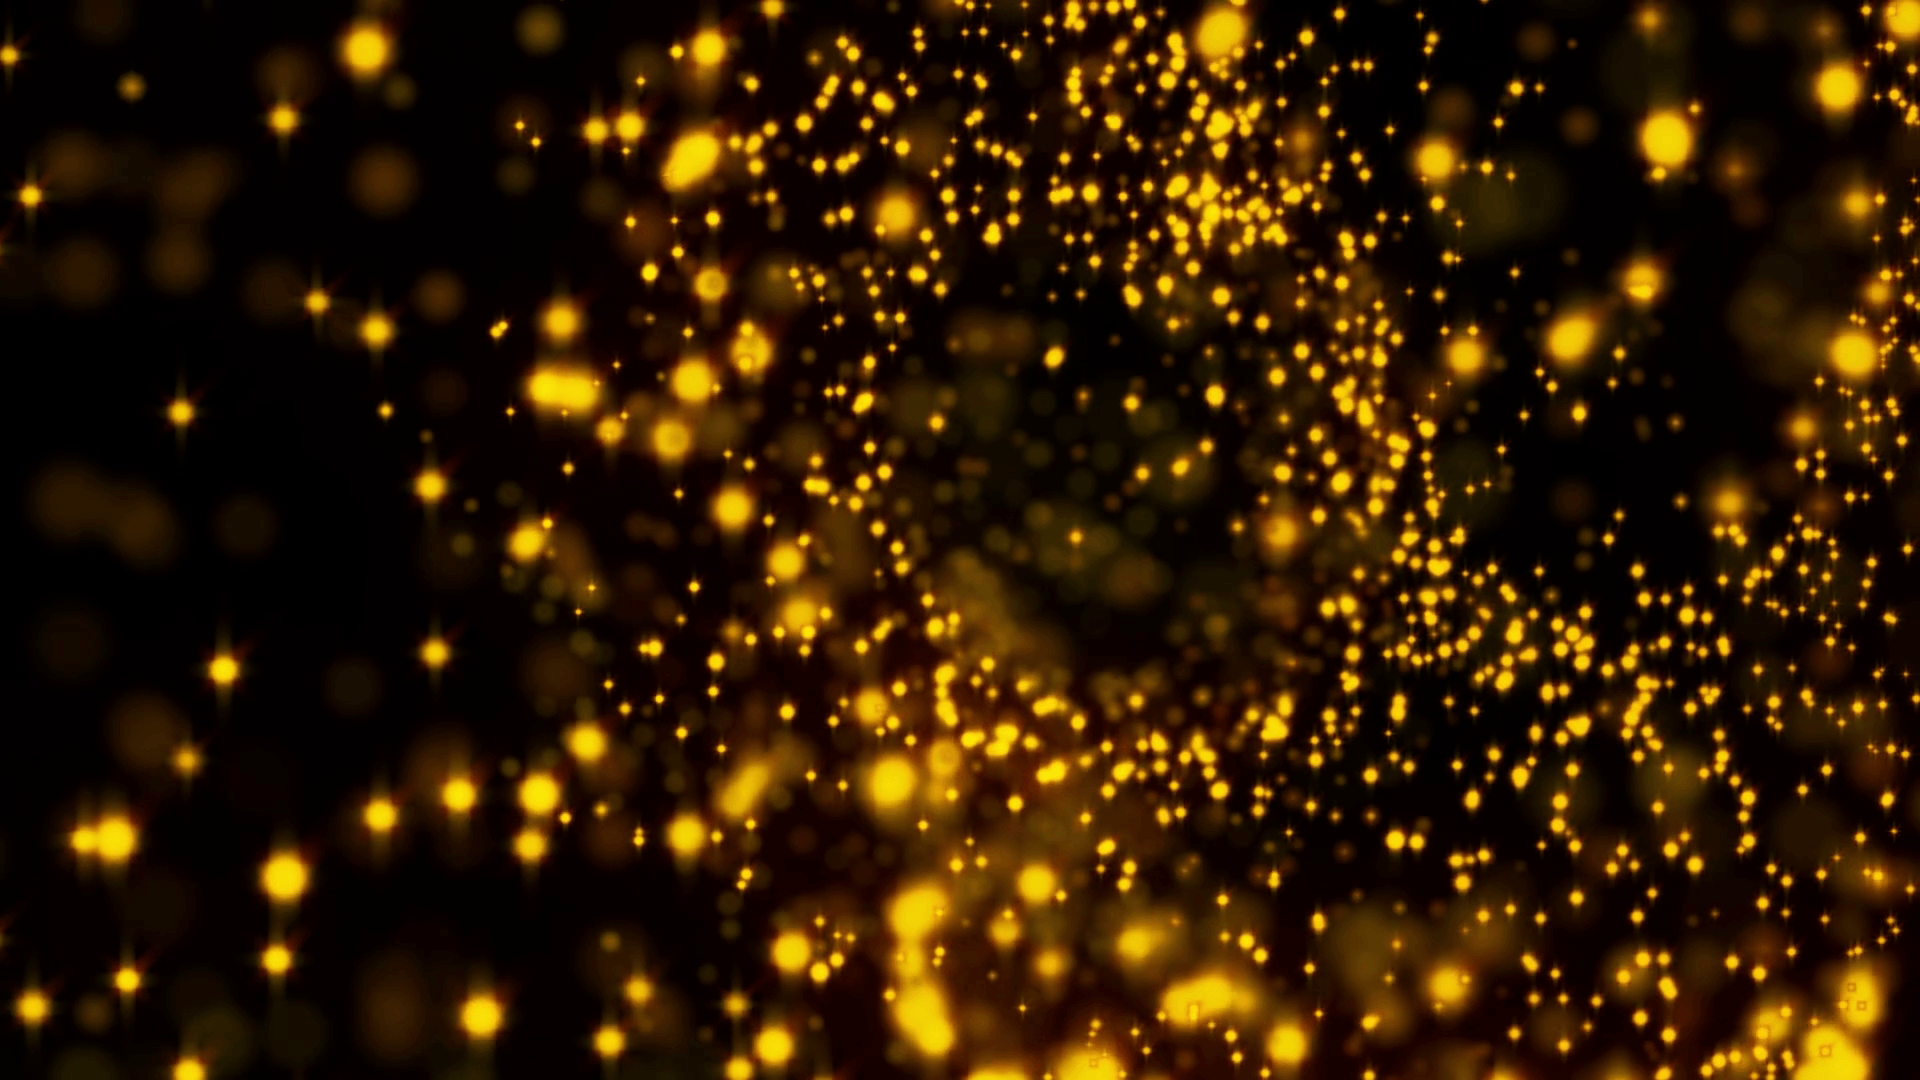 Background gold movement. Universe gold dust with stars on black